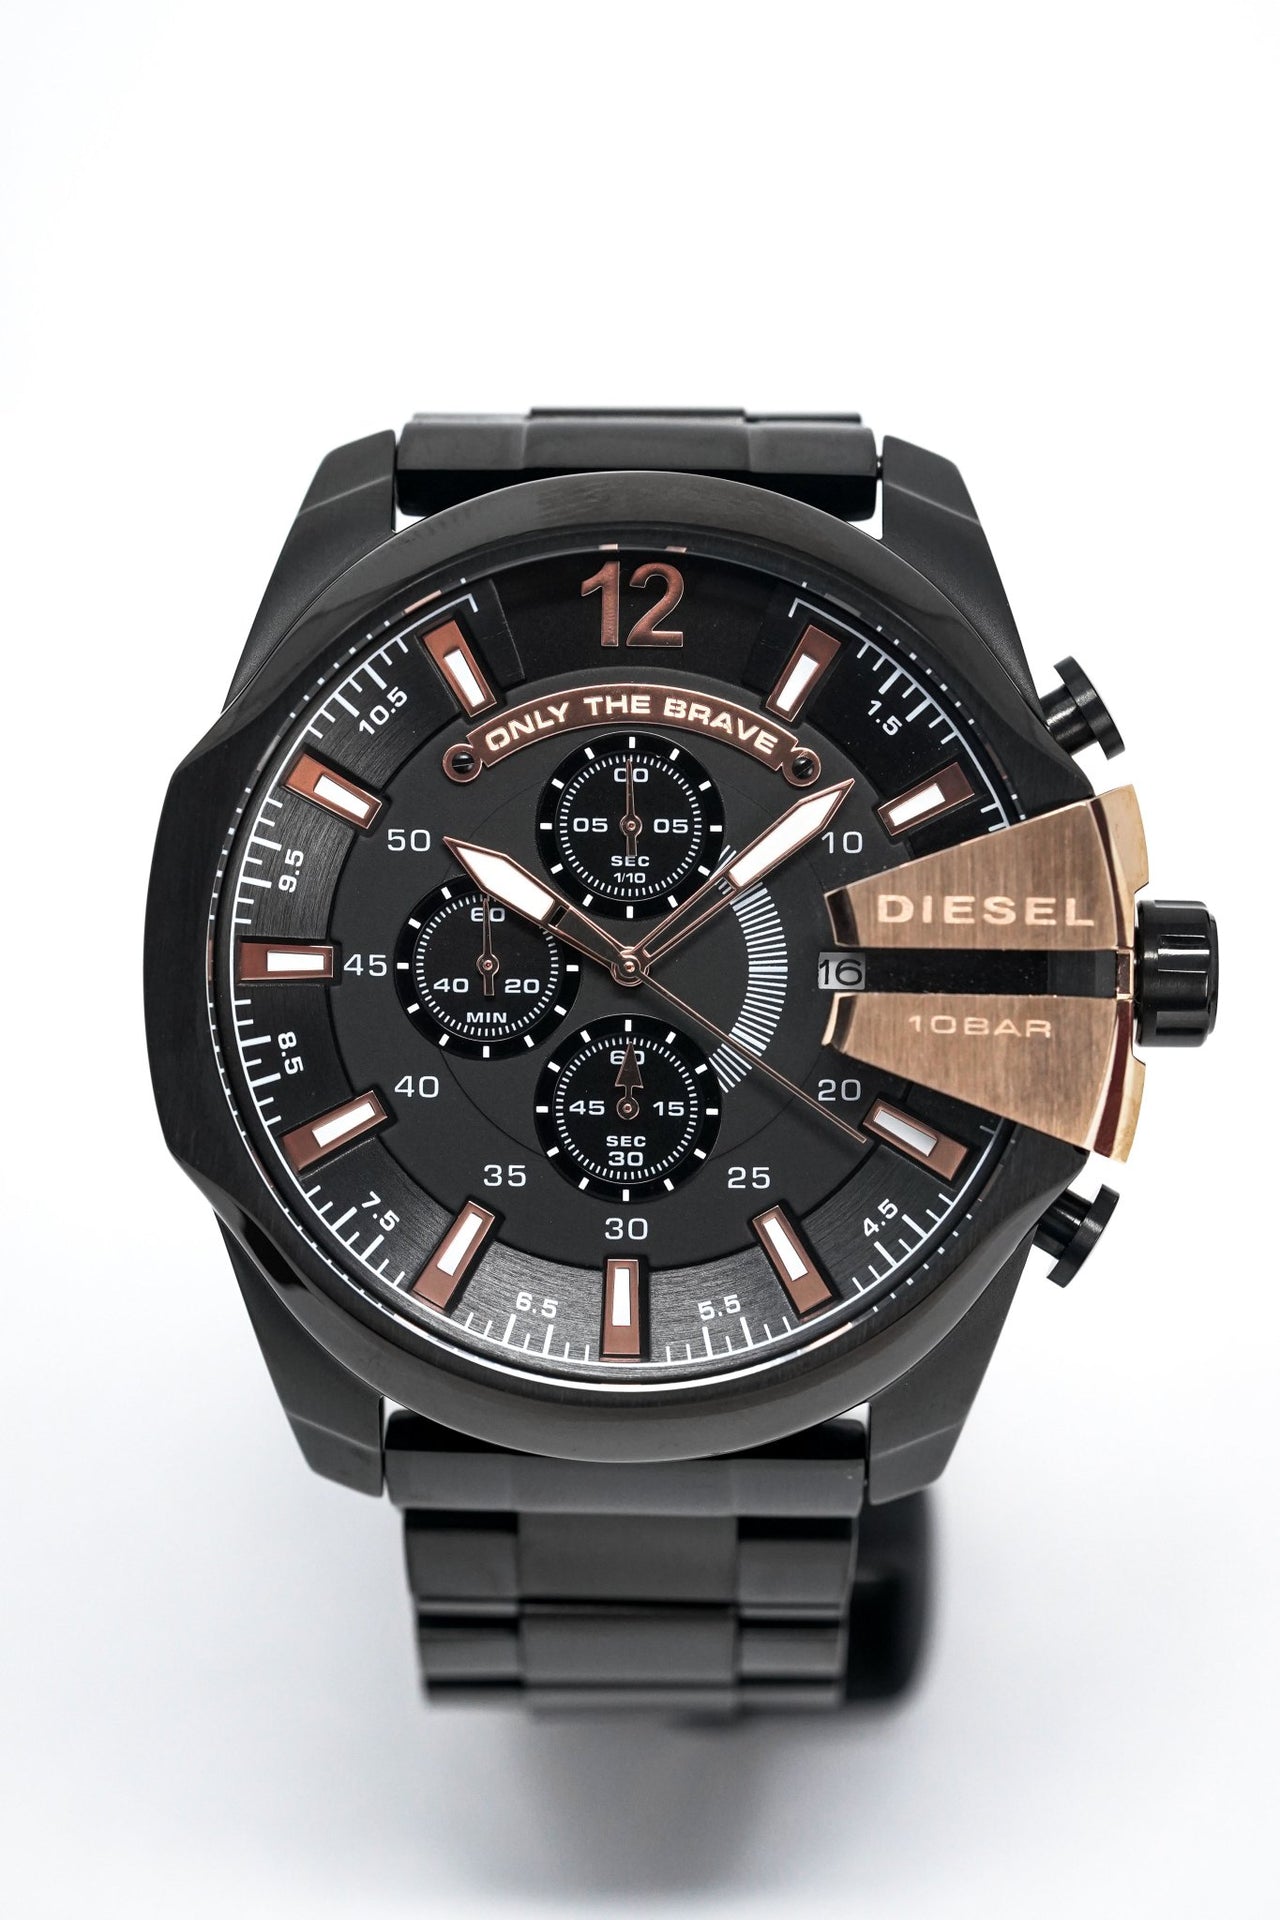 Diesel Men's Chronograph Watch Mega Chief IP Rose Gold - Watches & Crystals